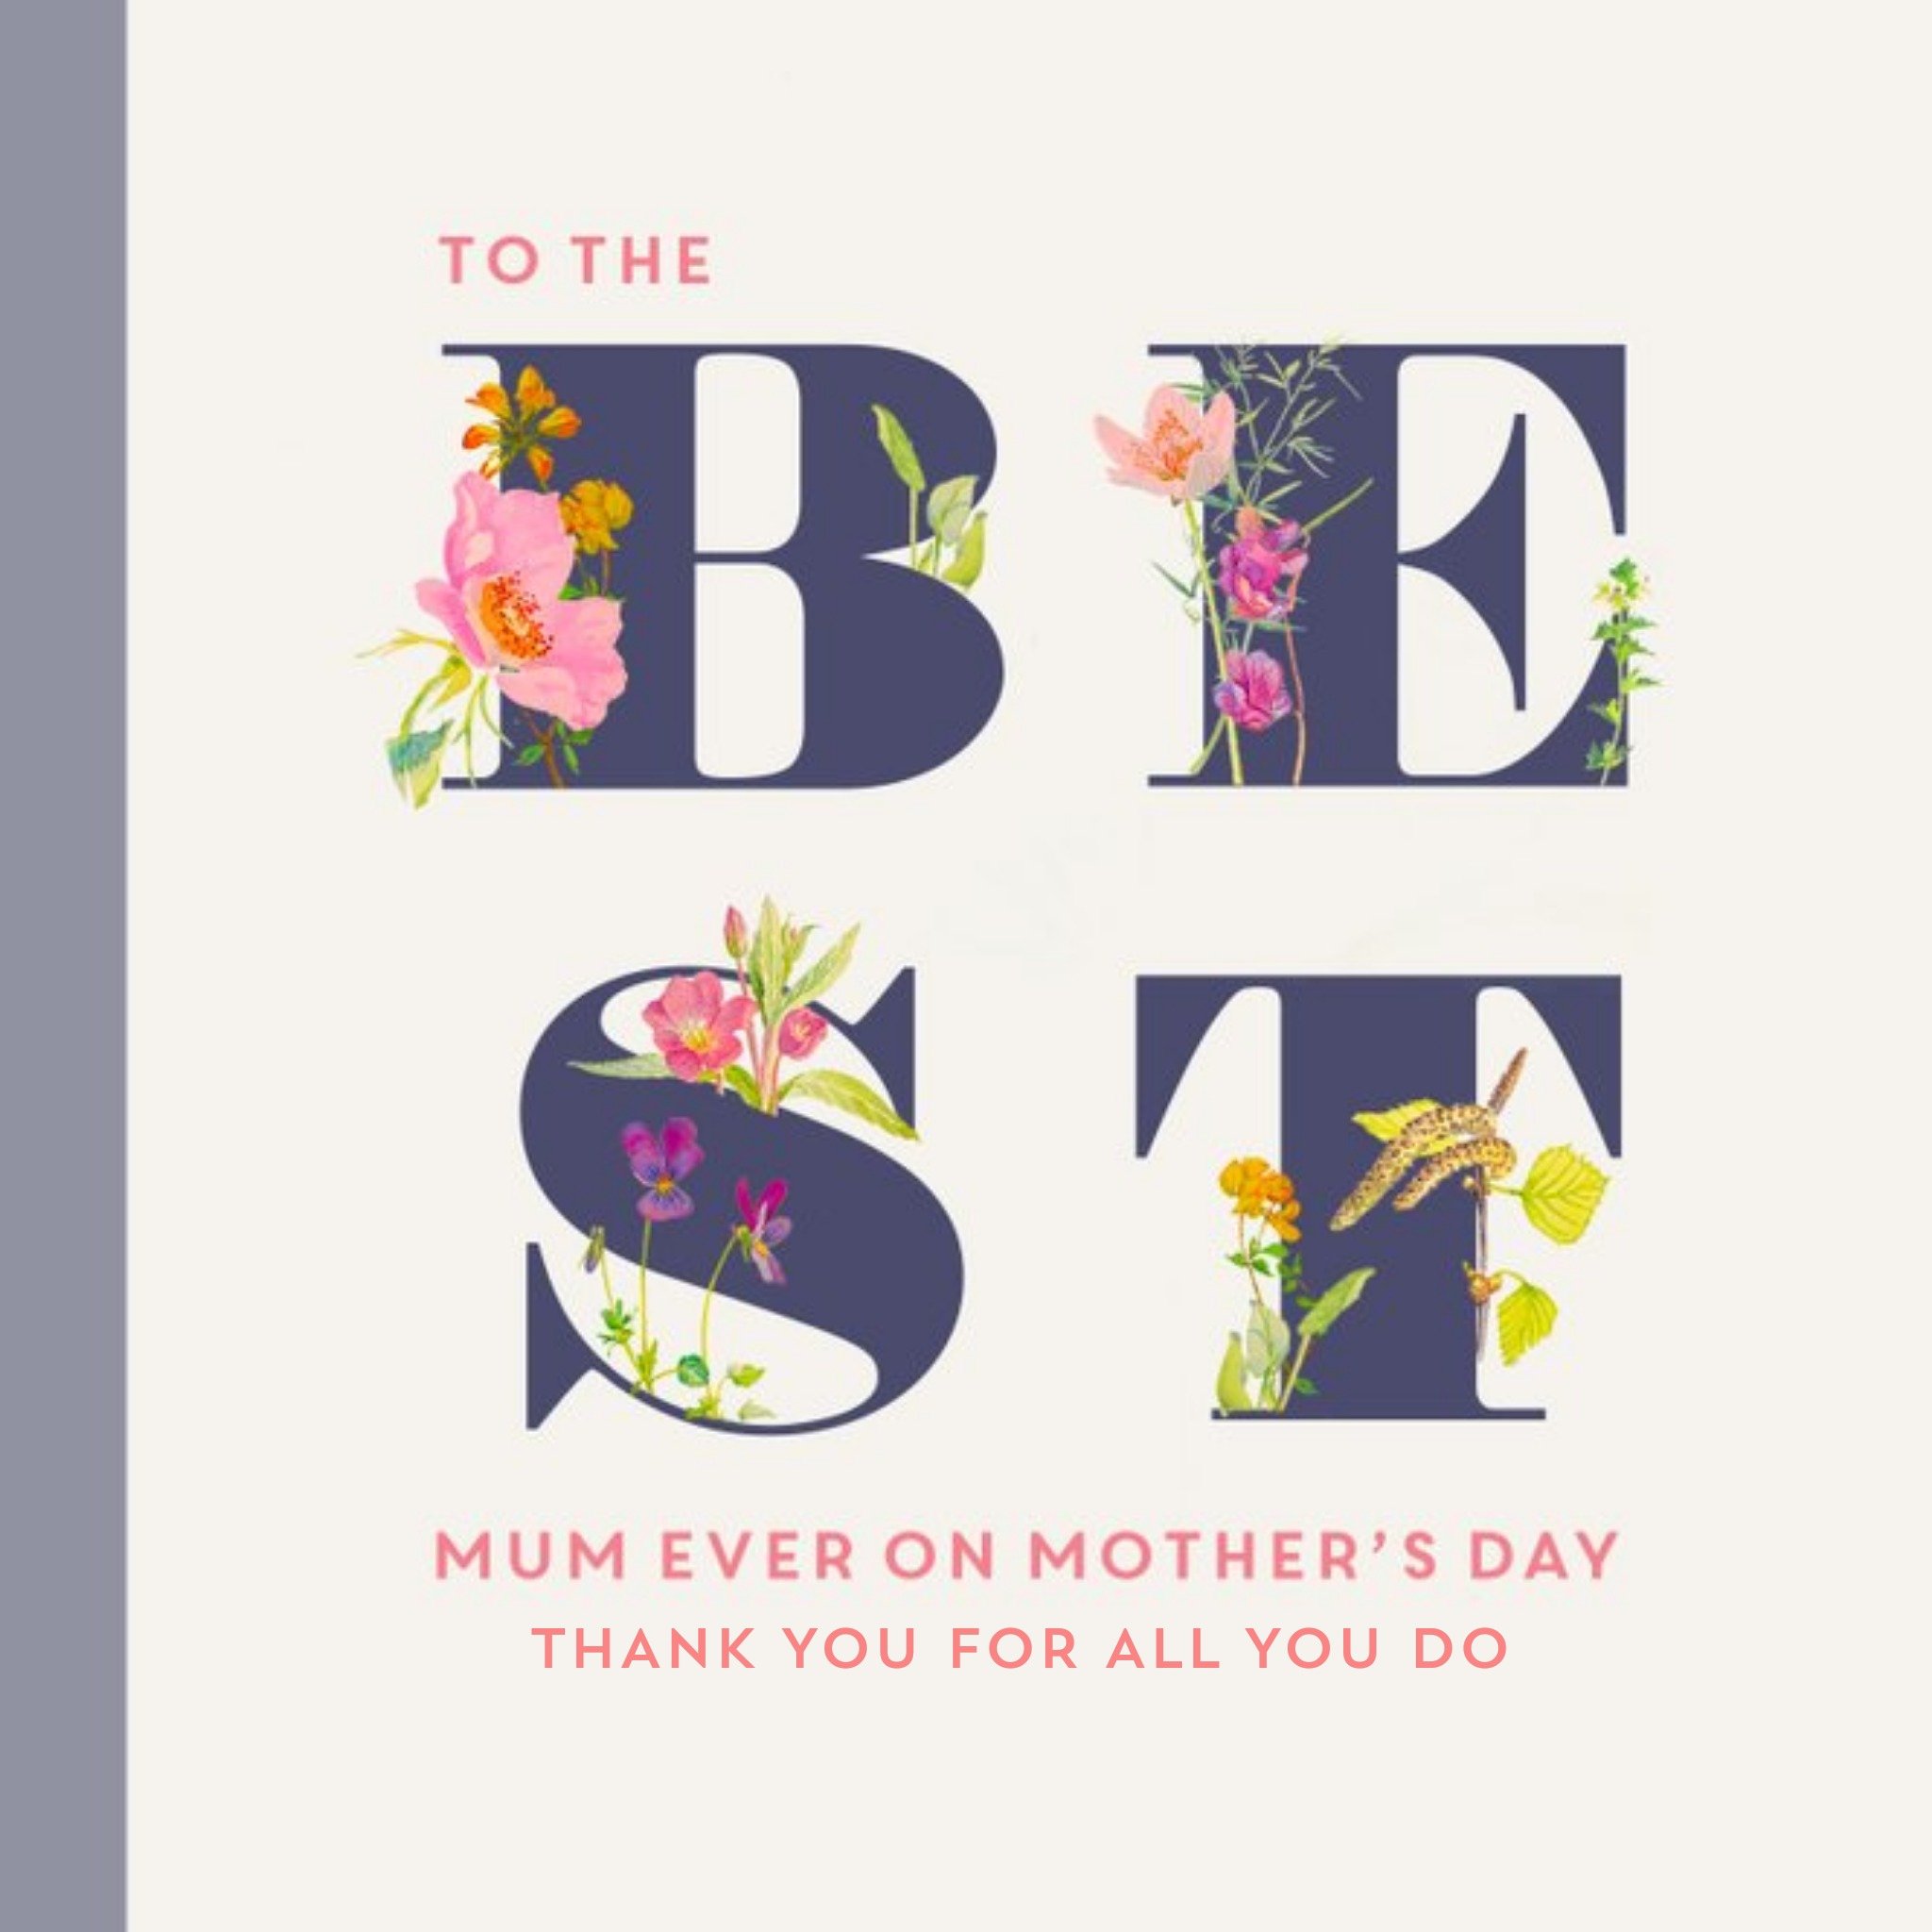 Edwardian Lady Best Mum Ever Floral Mother's Day Card, Square